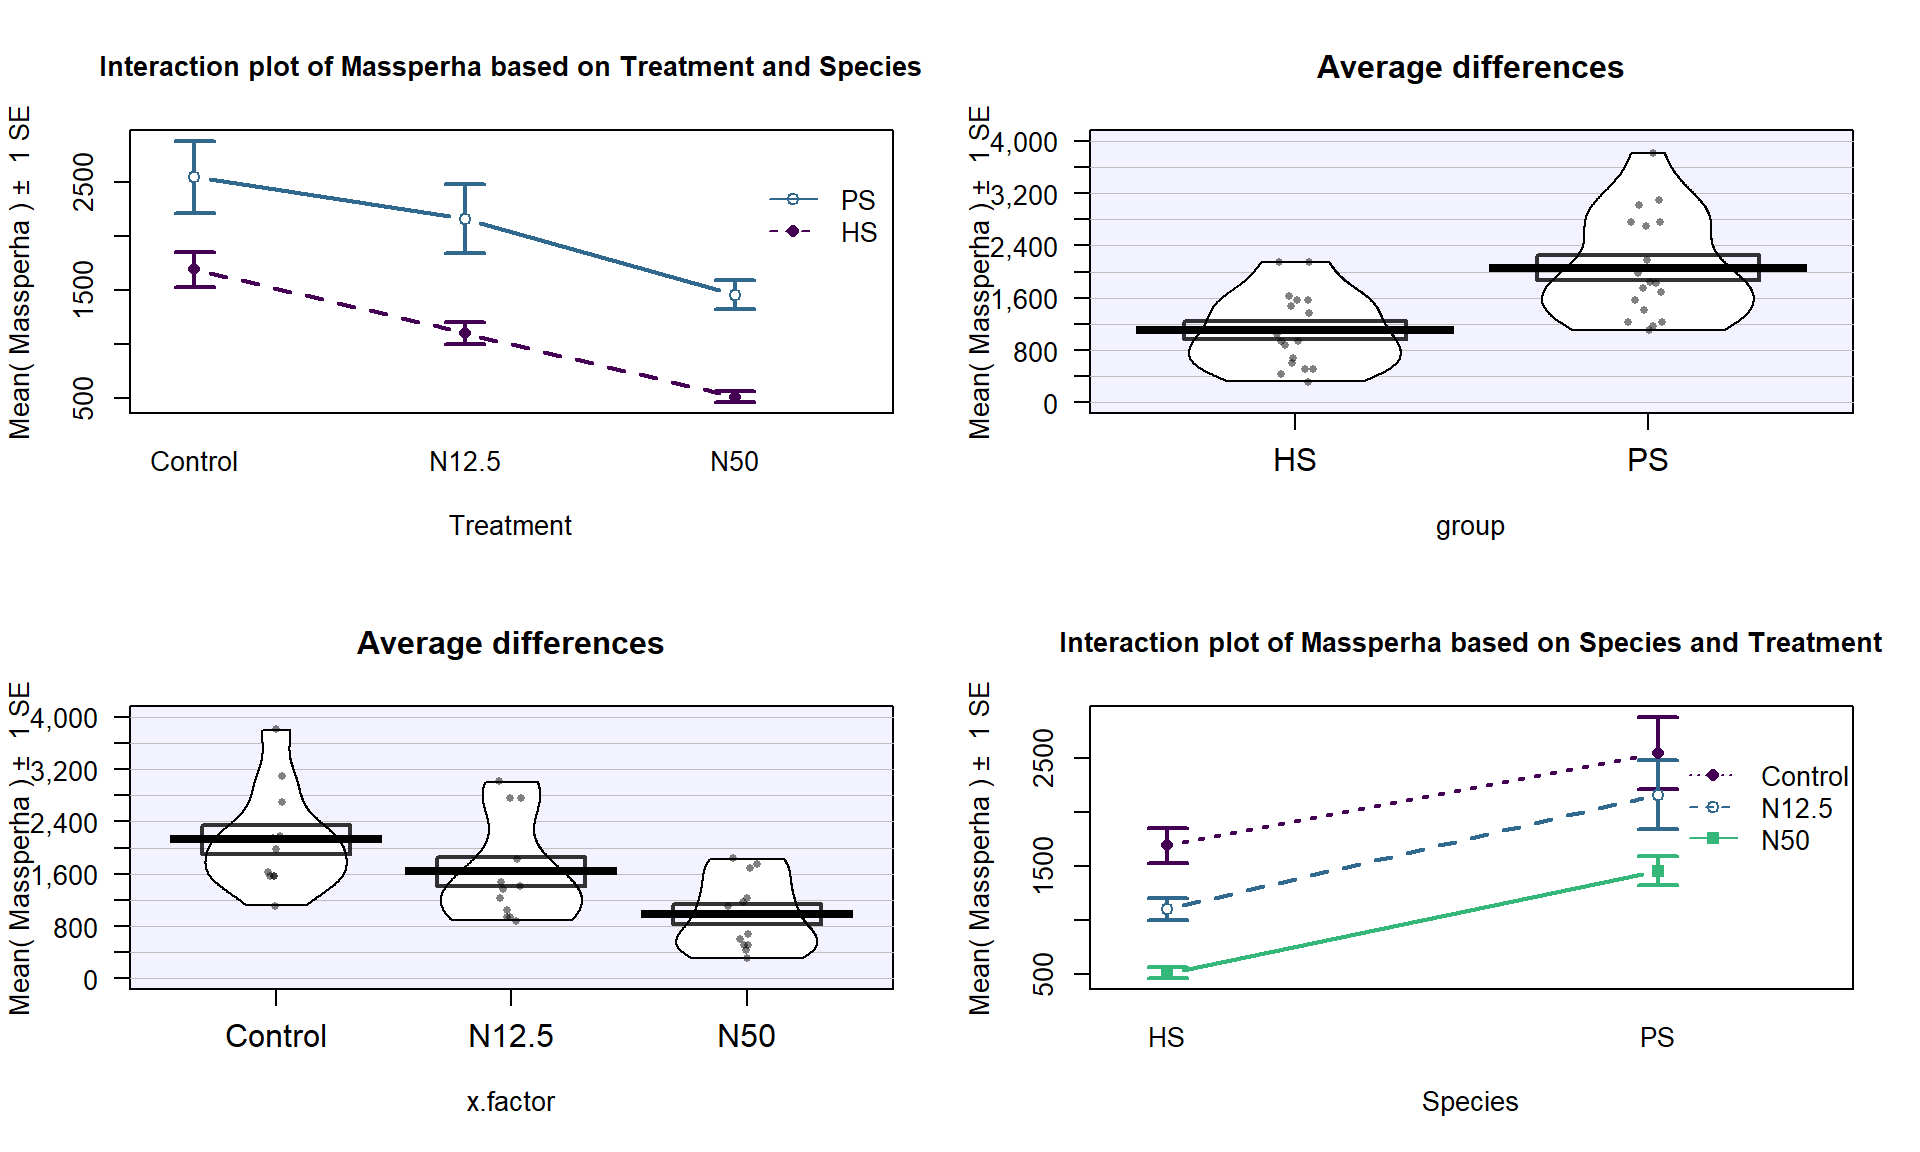 Interaction plot of biomass responses by treatment and species.